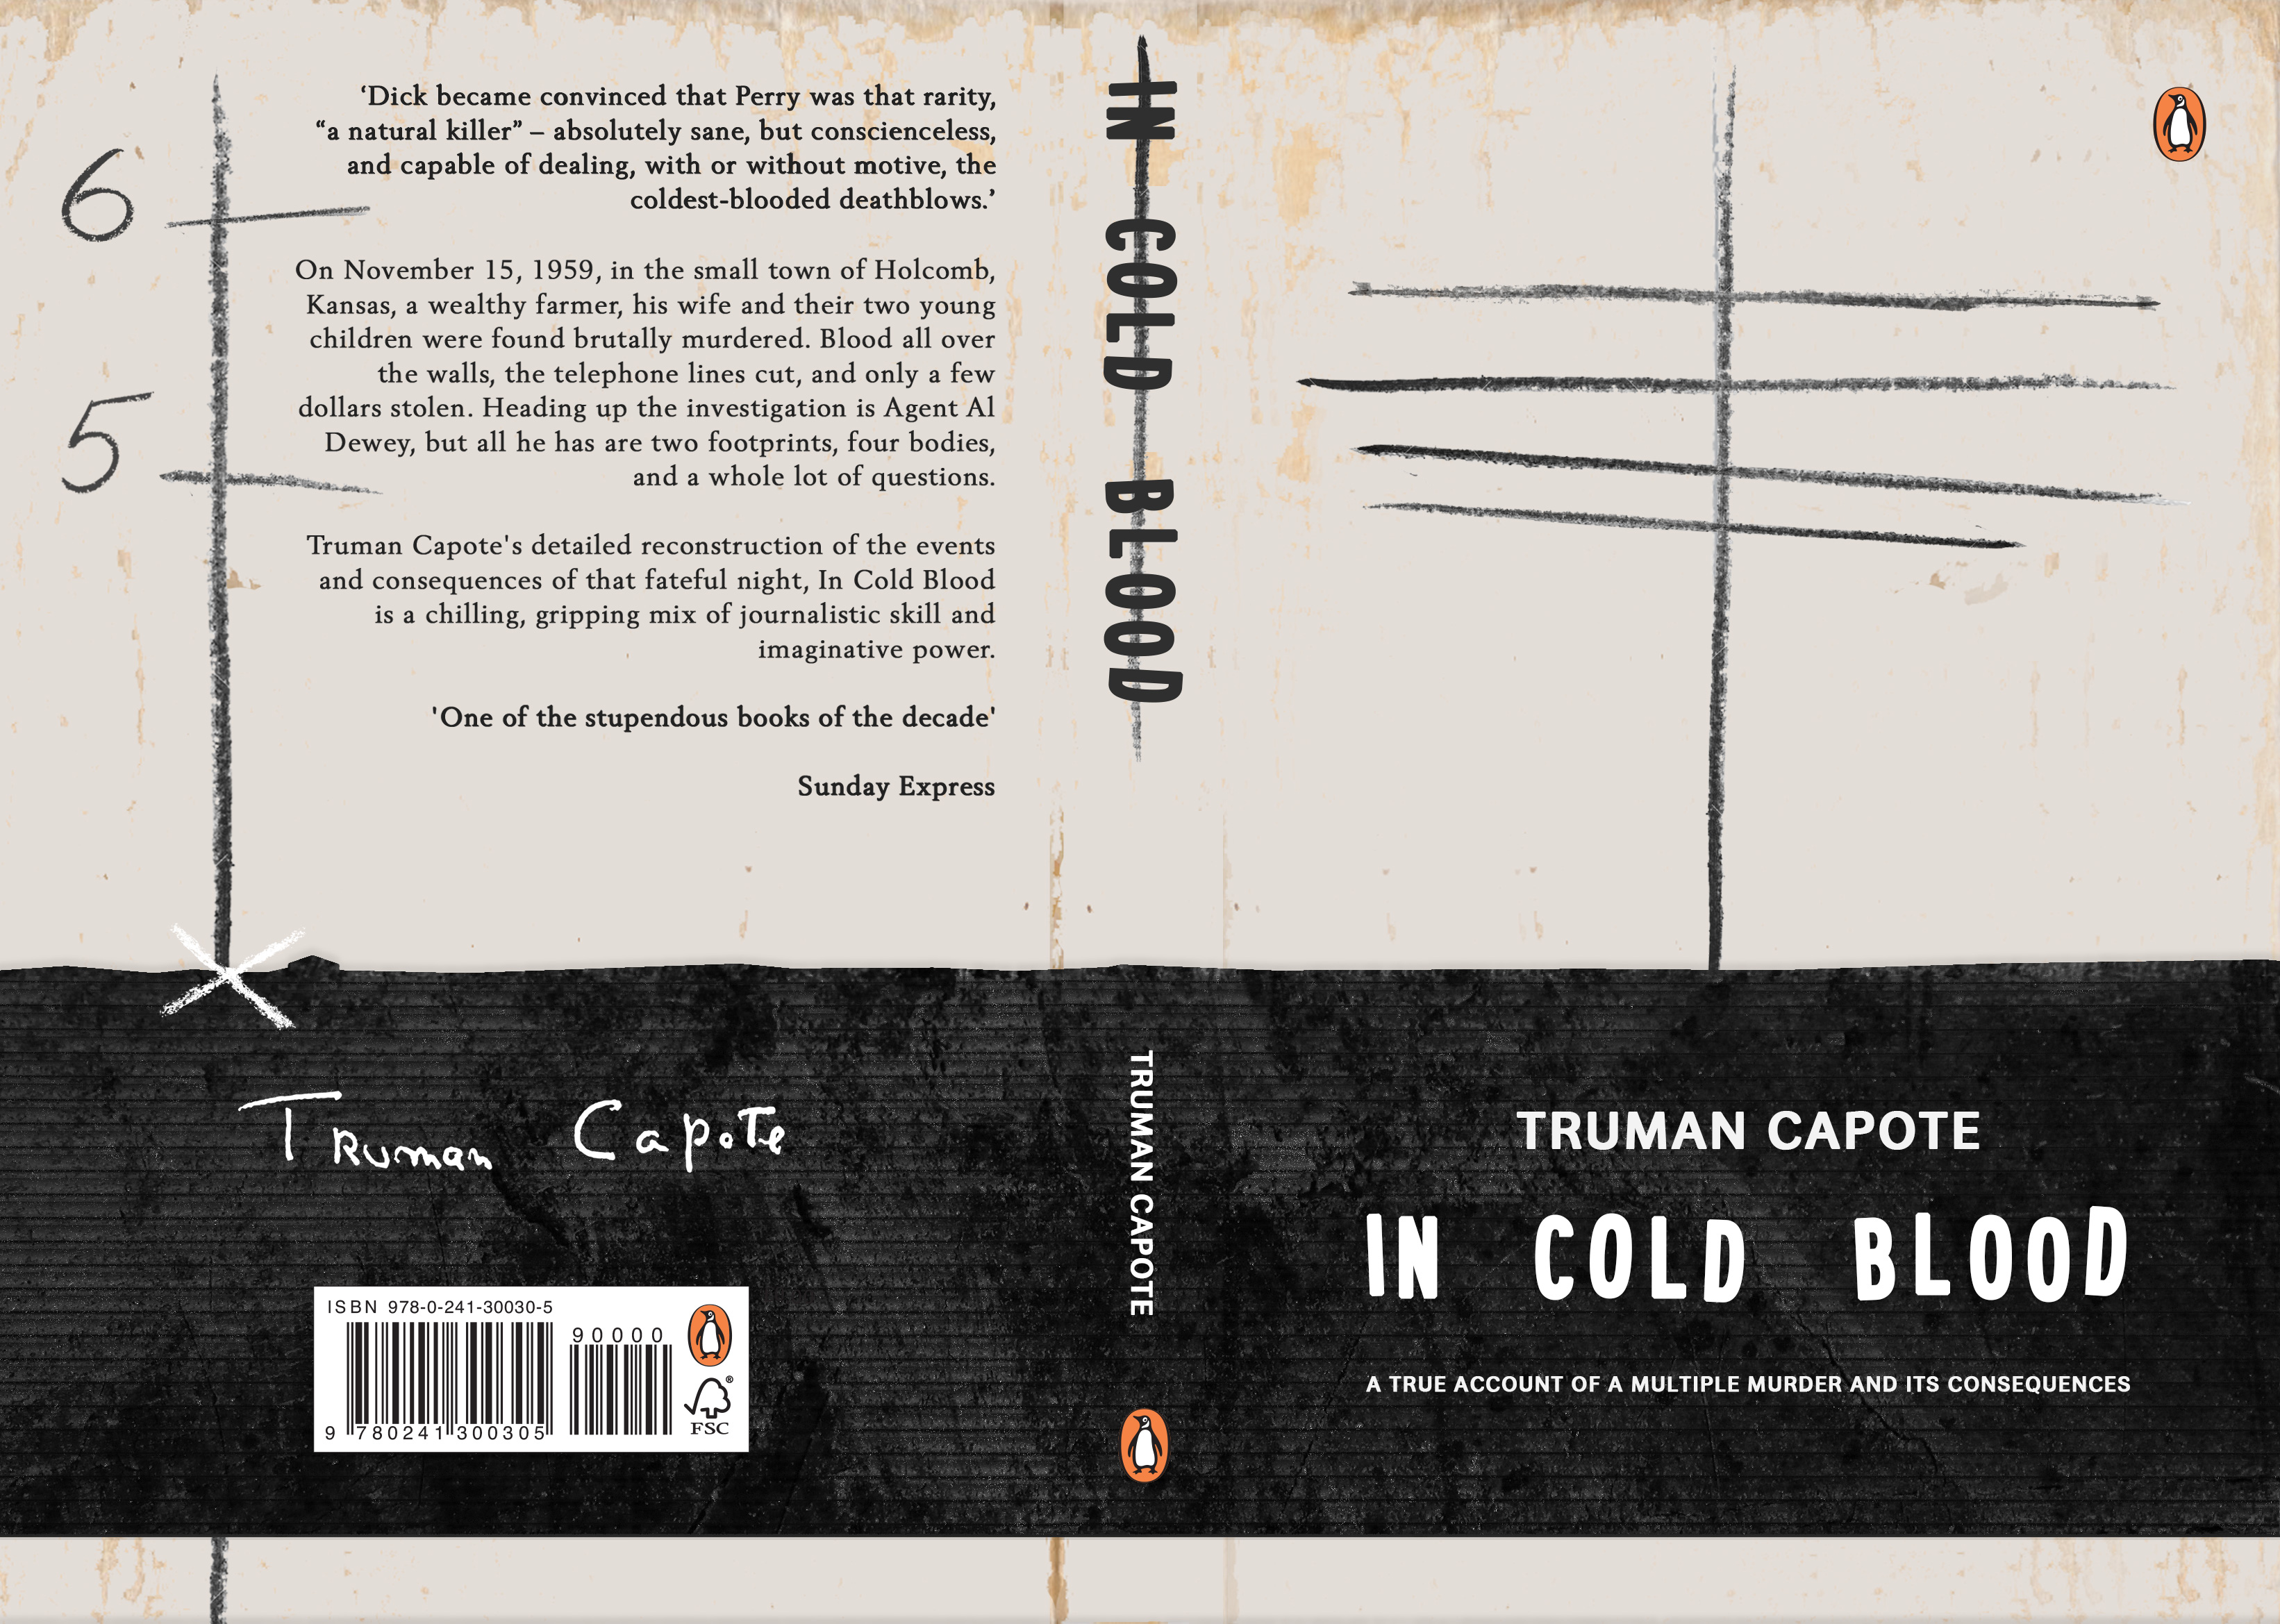 In Cold Blood book cover design